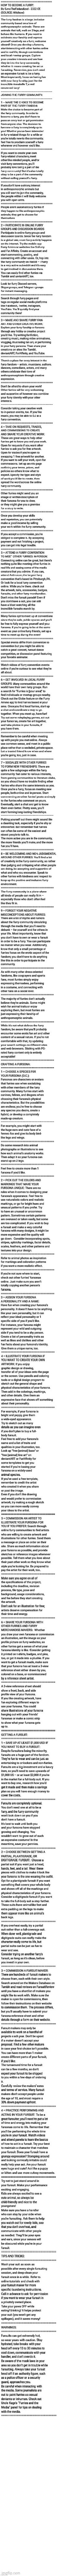 HOW TO BECOME A FURRY: By SimoTheFinlandized - 2022 CE (SOURCE: Wikihow) | image tagged in simothefinlandized,the furry fandom,tutorial,treatise,infographic | made w/ Imgflip meme maker